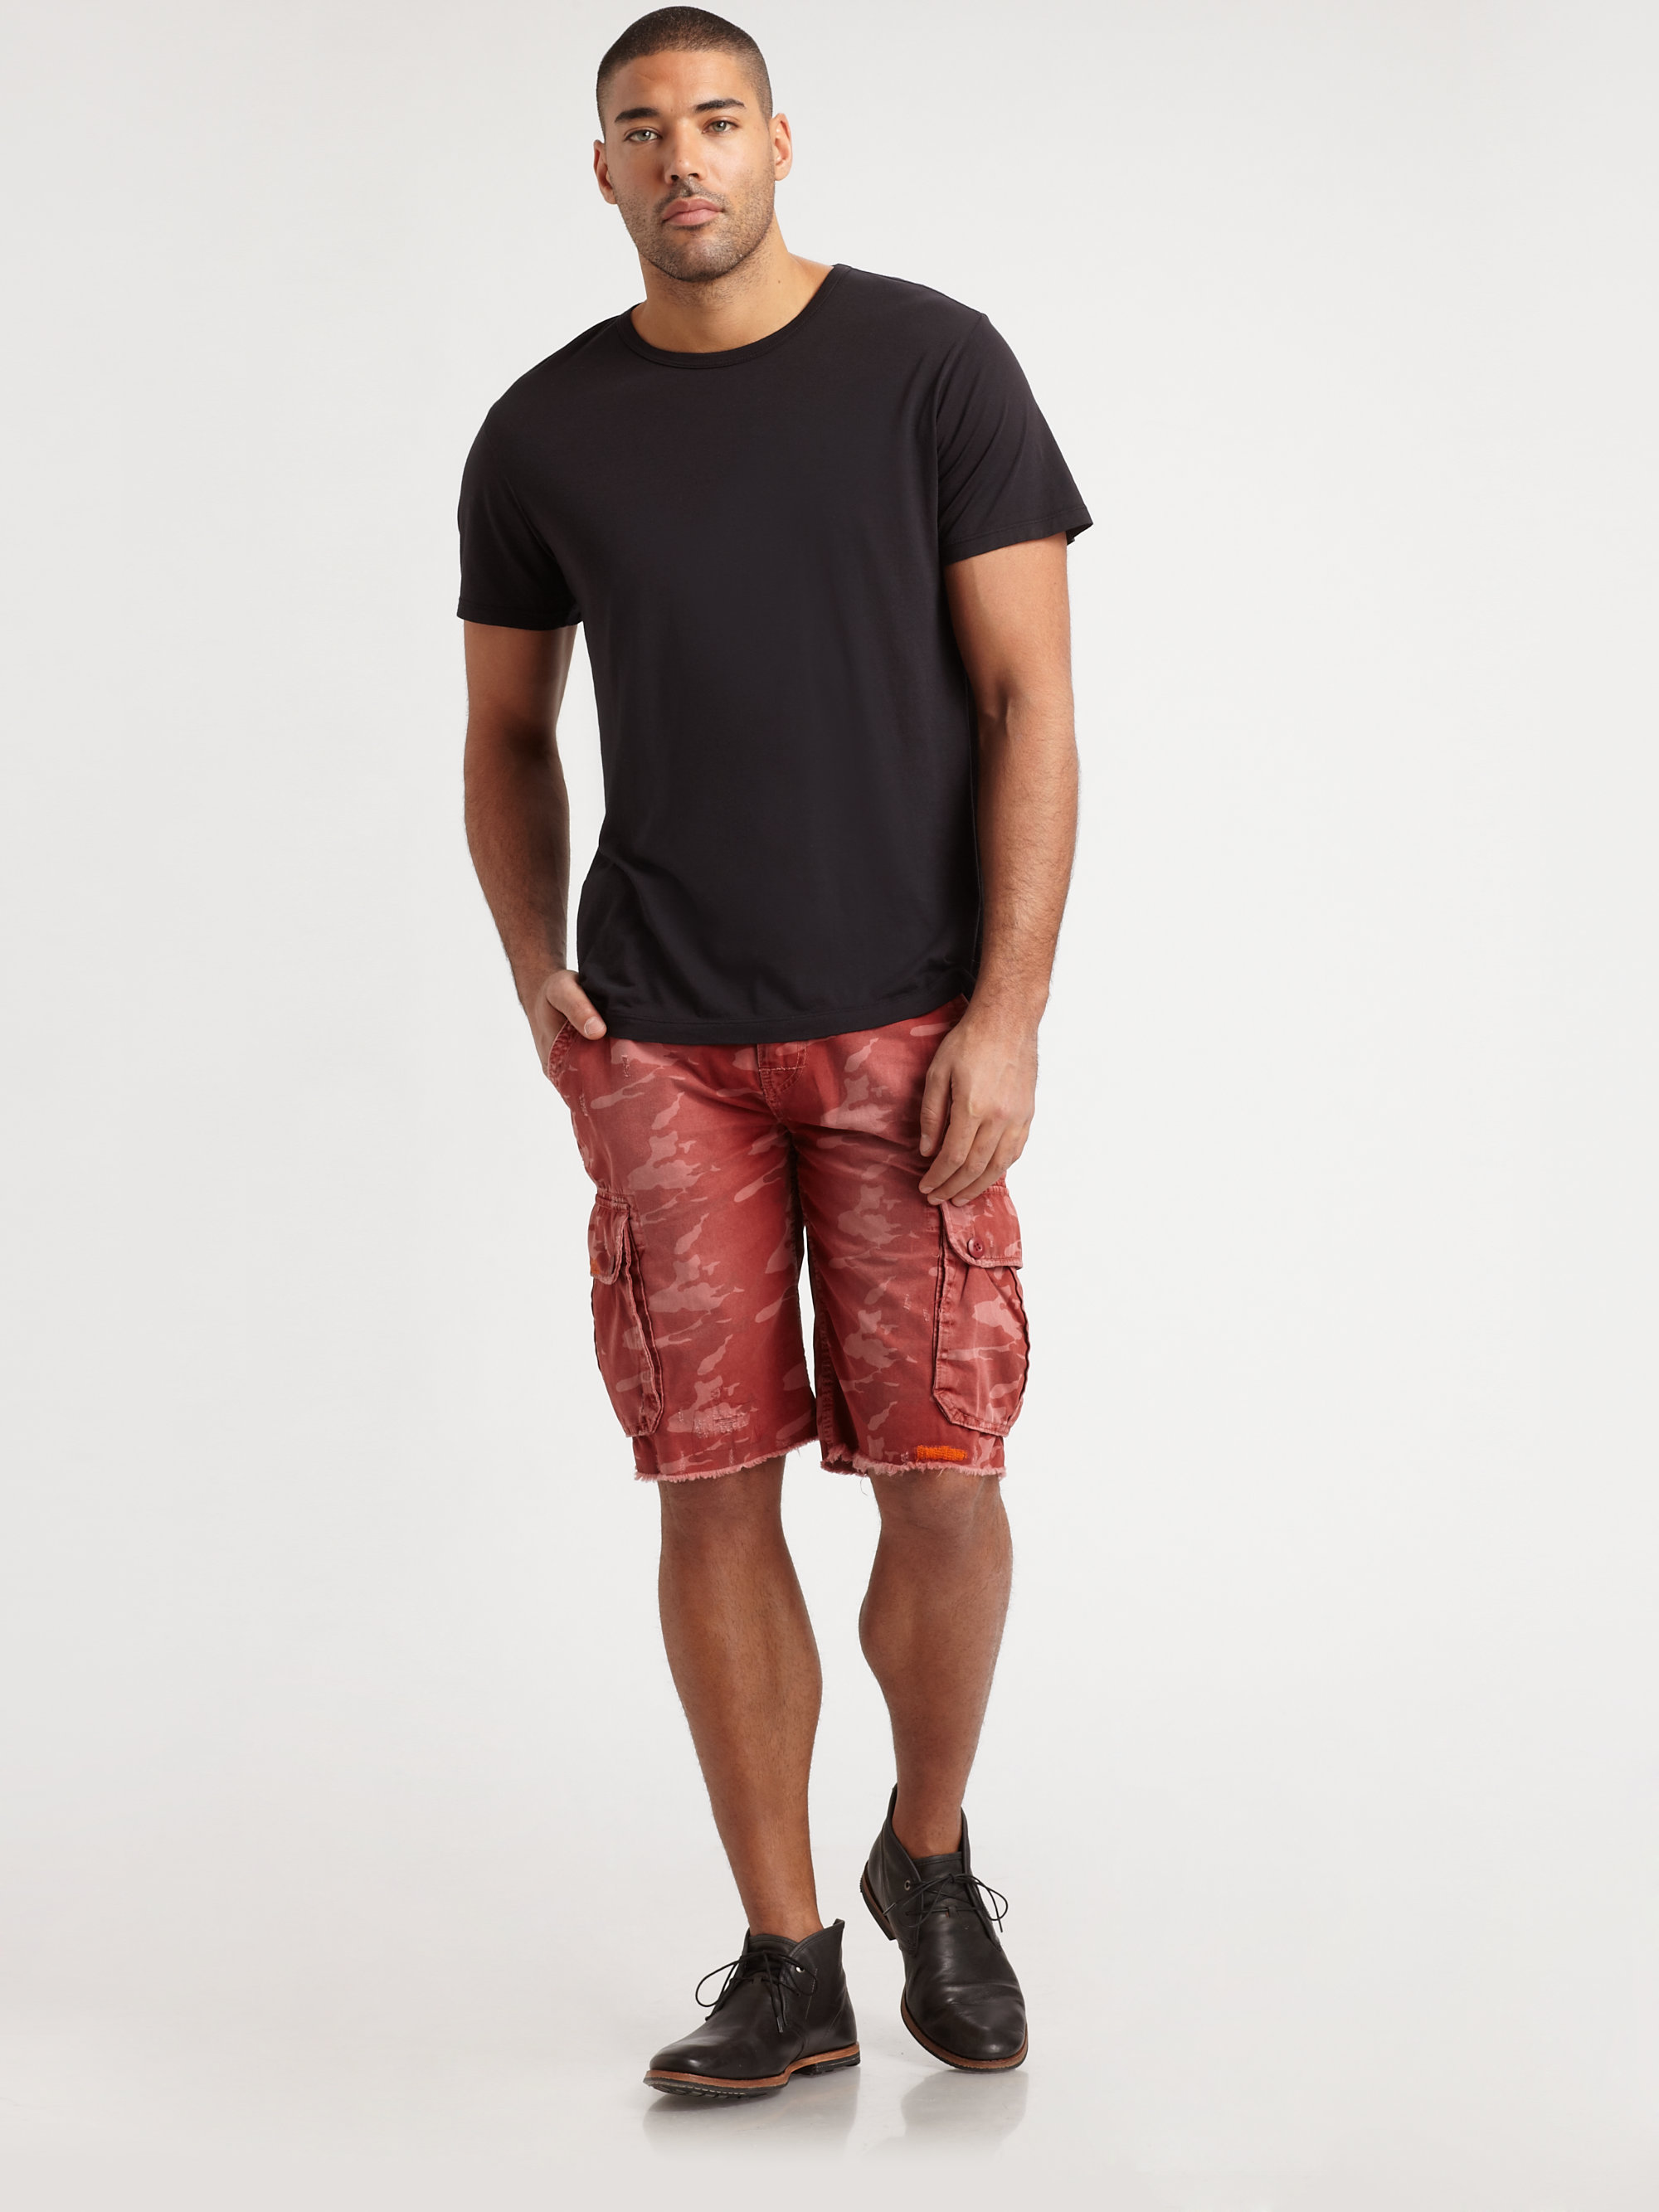 Lyst - True Religion Recon Cargo Shorts in Red for Men